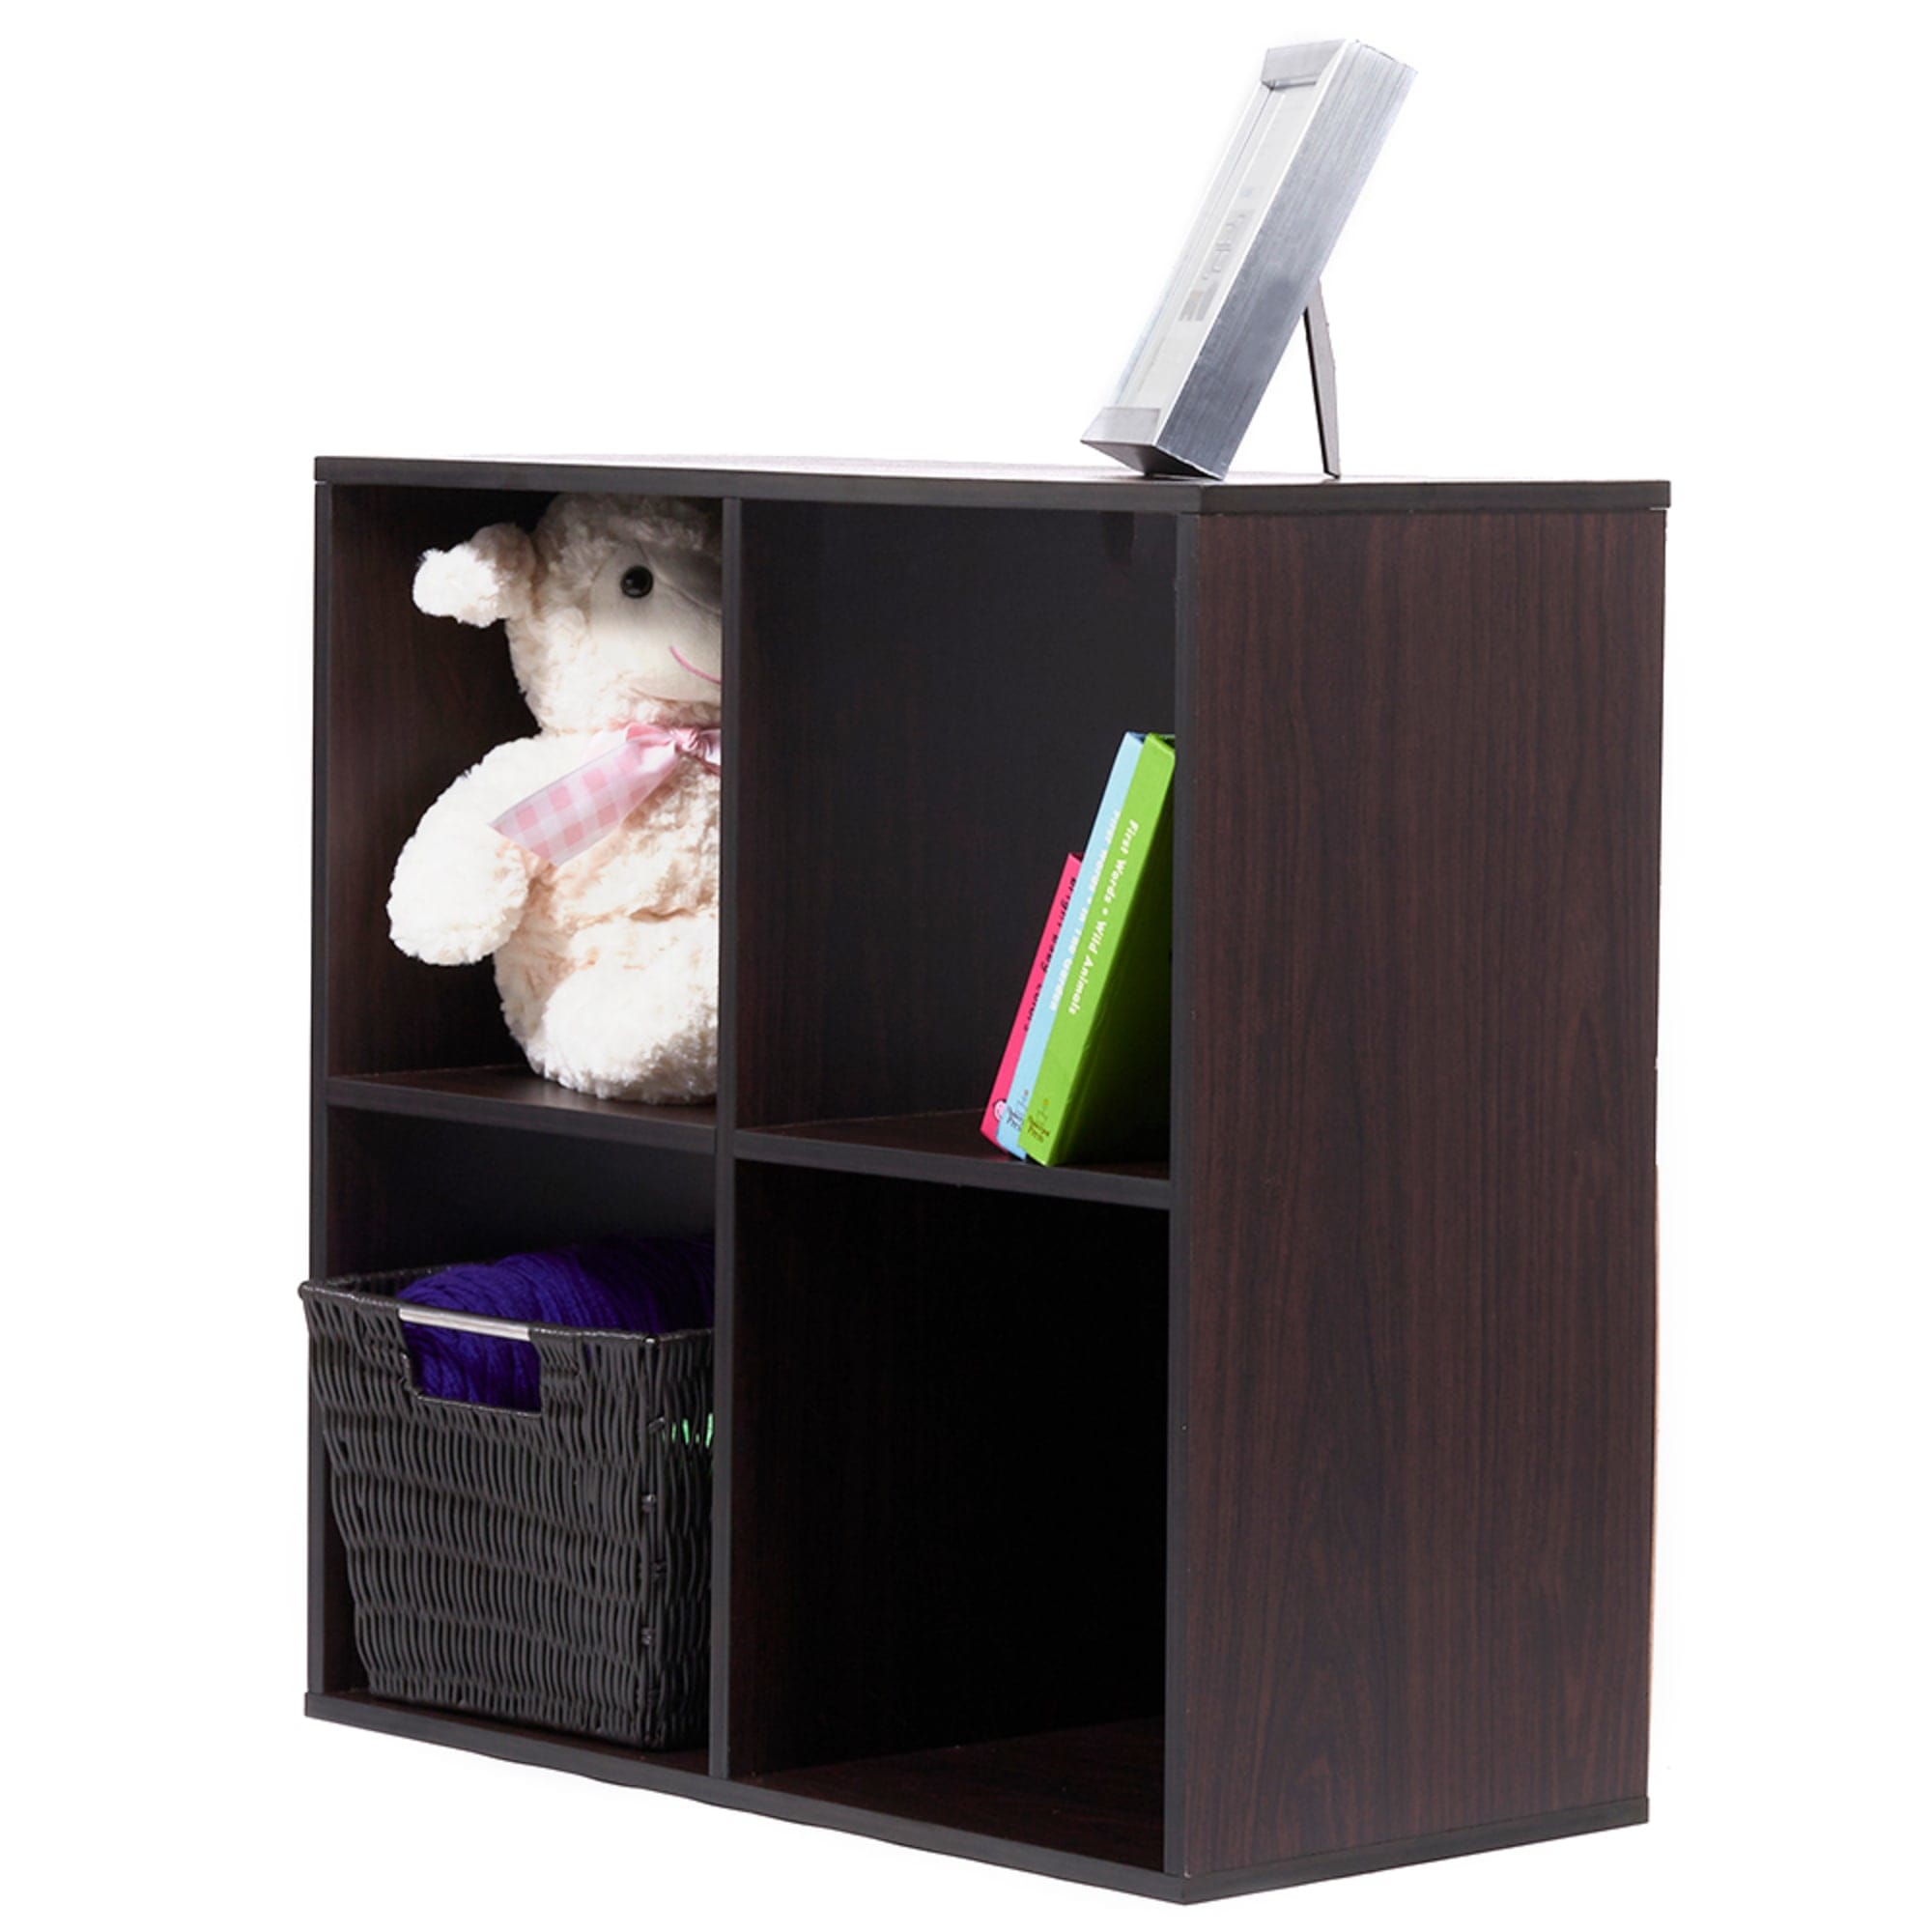 Home Basics Open and Enclosed 4 Cube MDF Storage Organizer, Espresso $30 EACH, CASE PACK OF 1